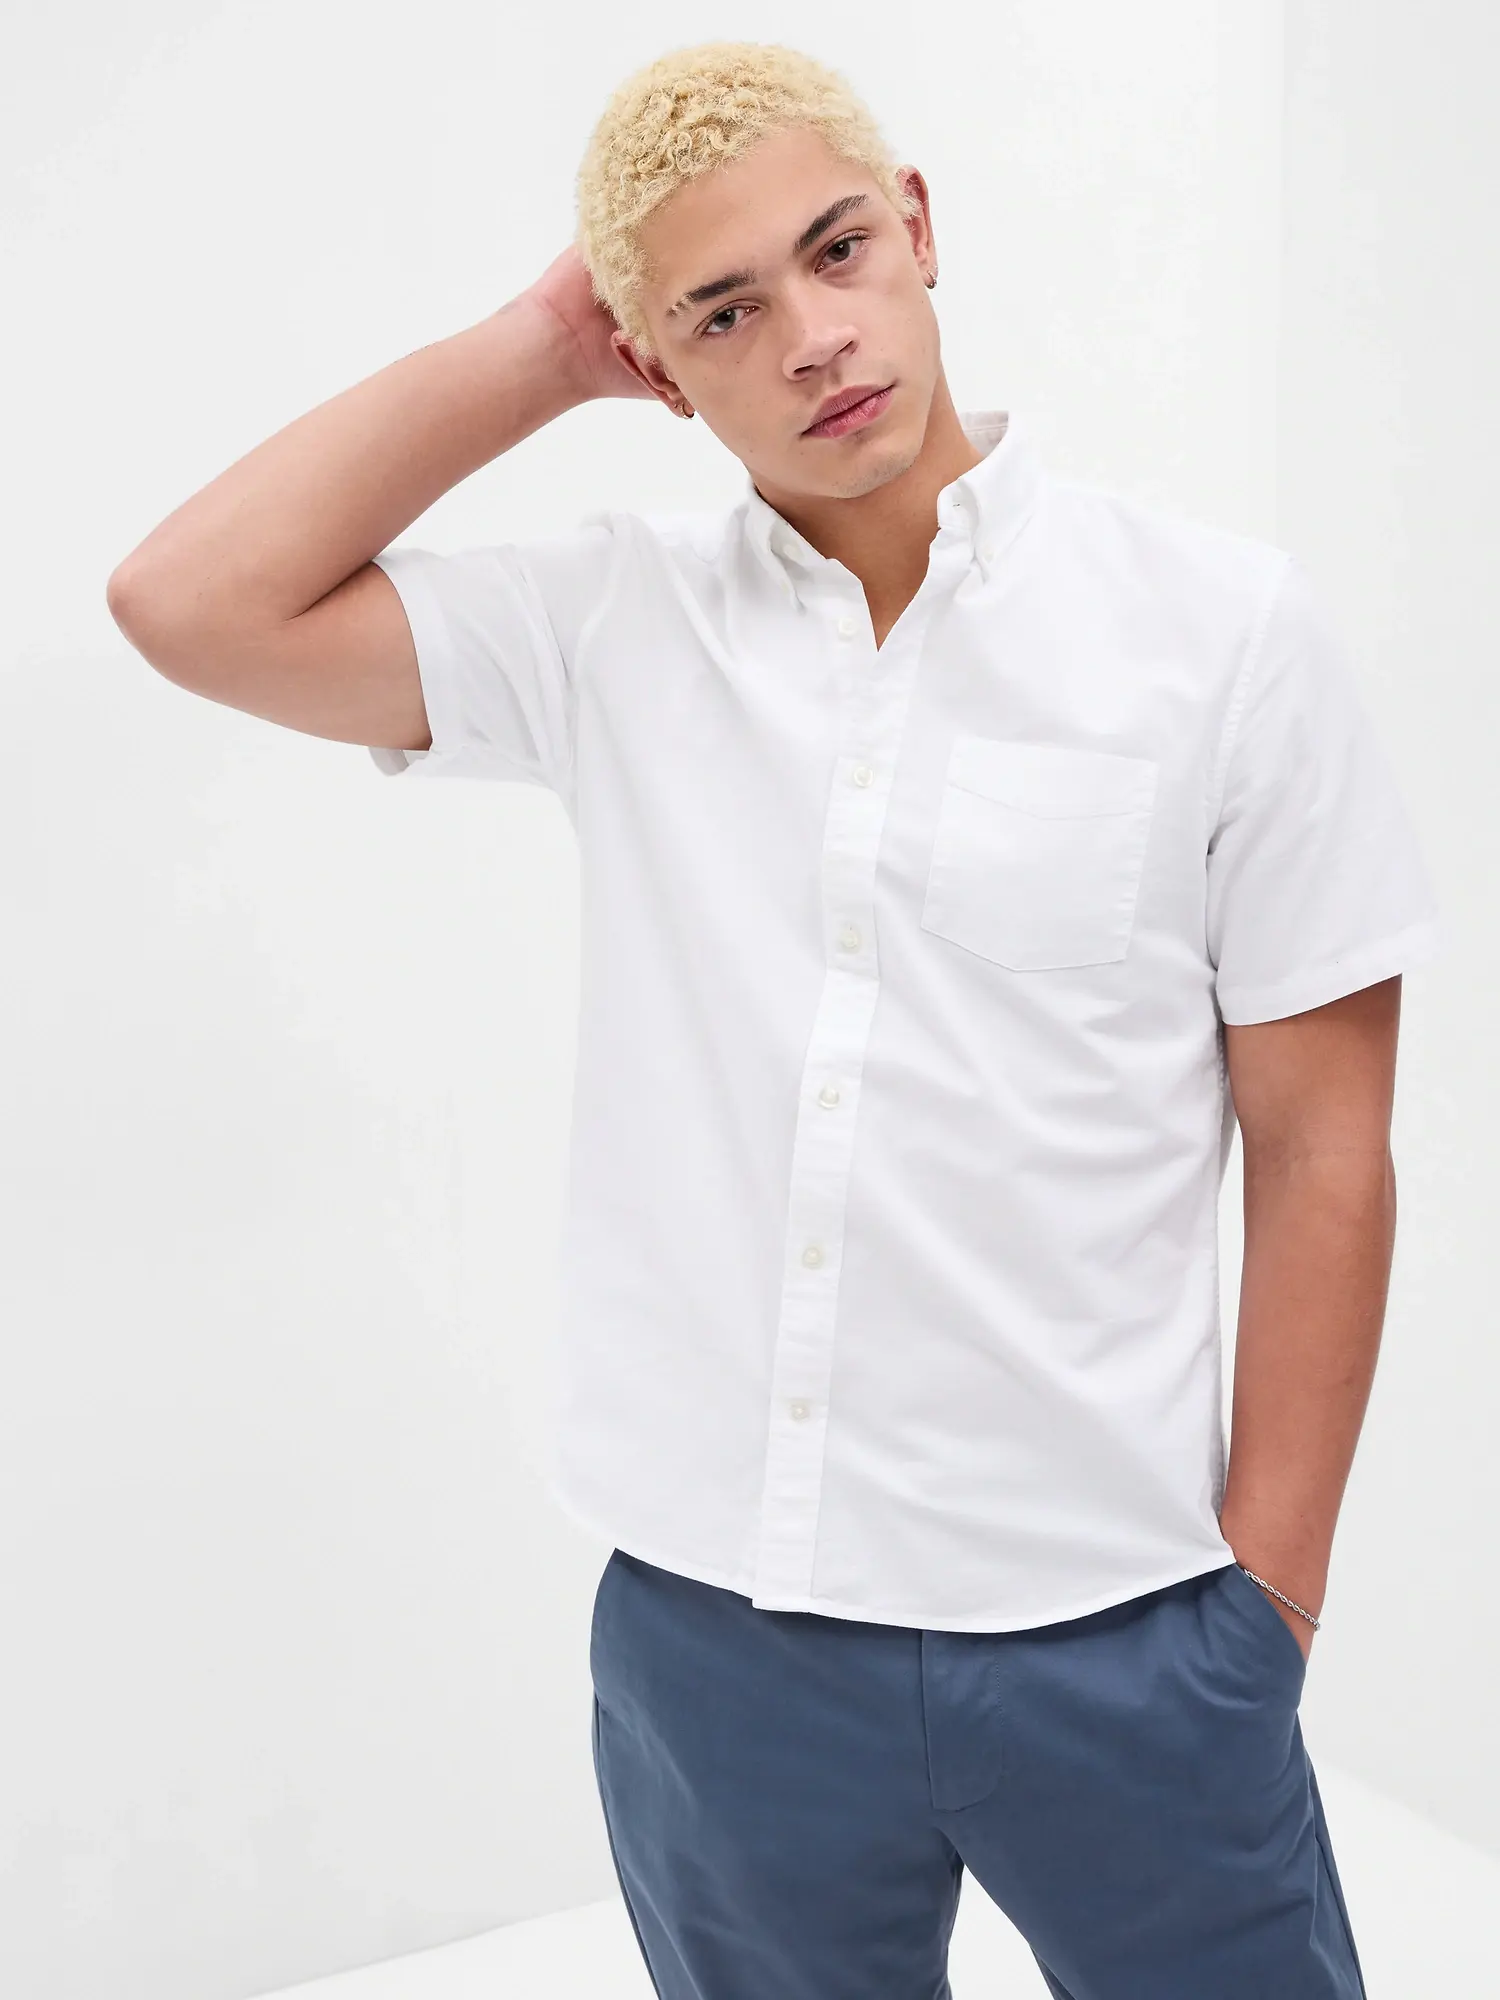 Gap Oxford Shirt in Standard Fit with In-Conversion Cotton white. 1